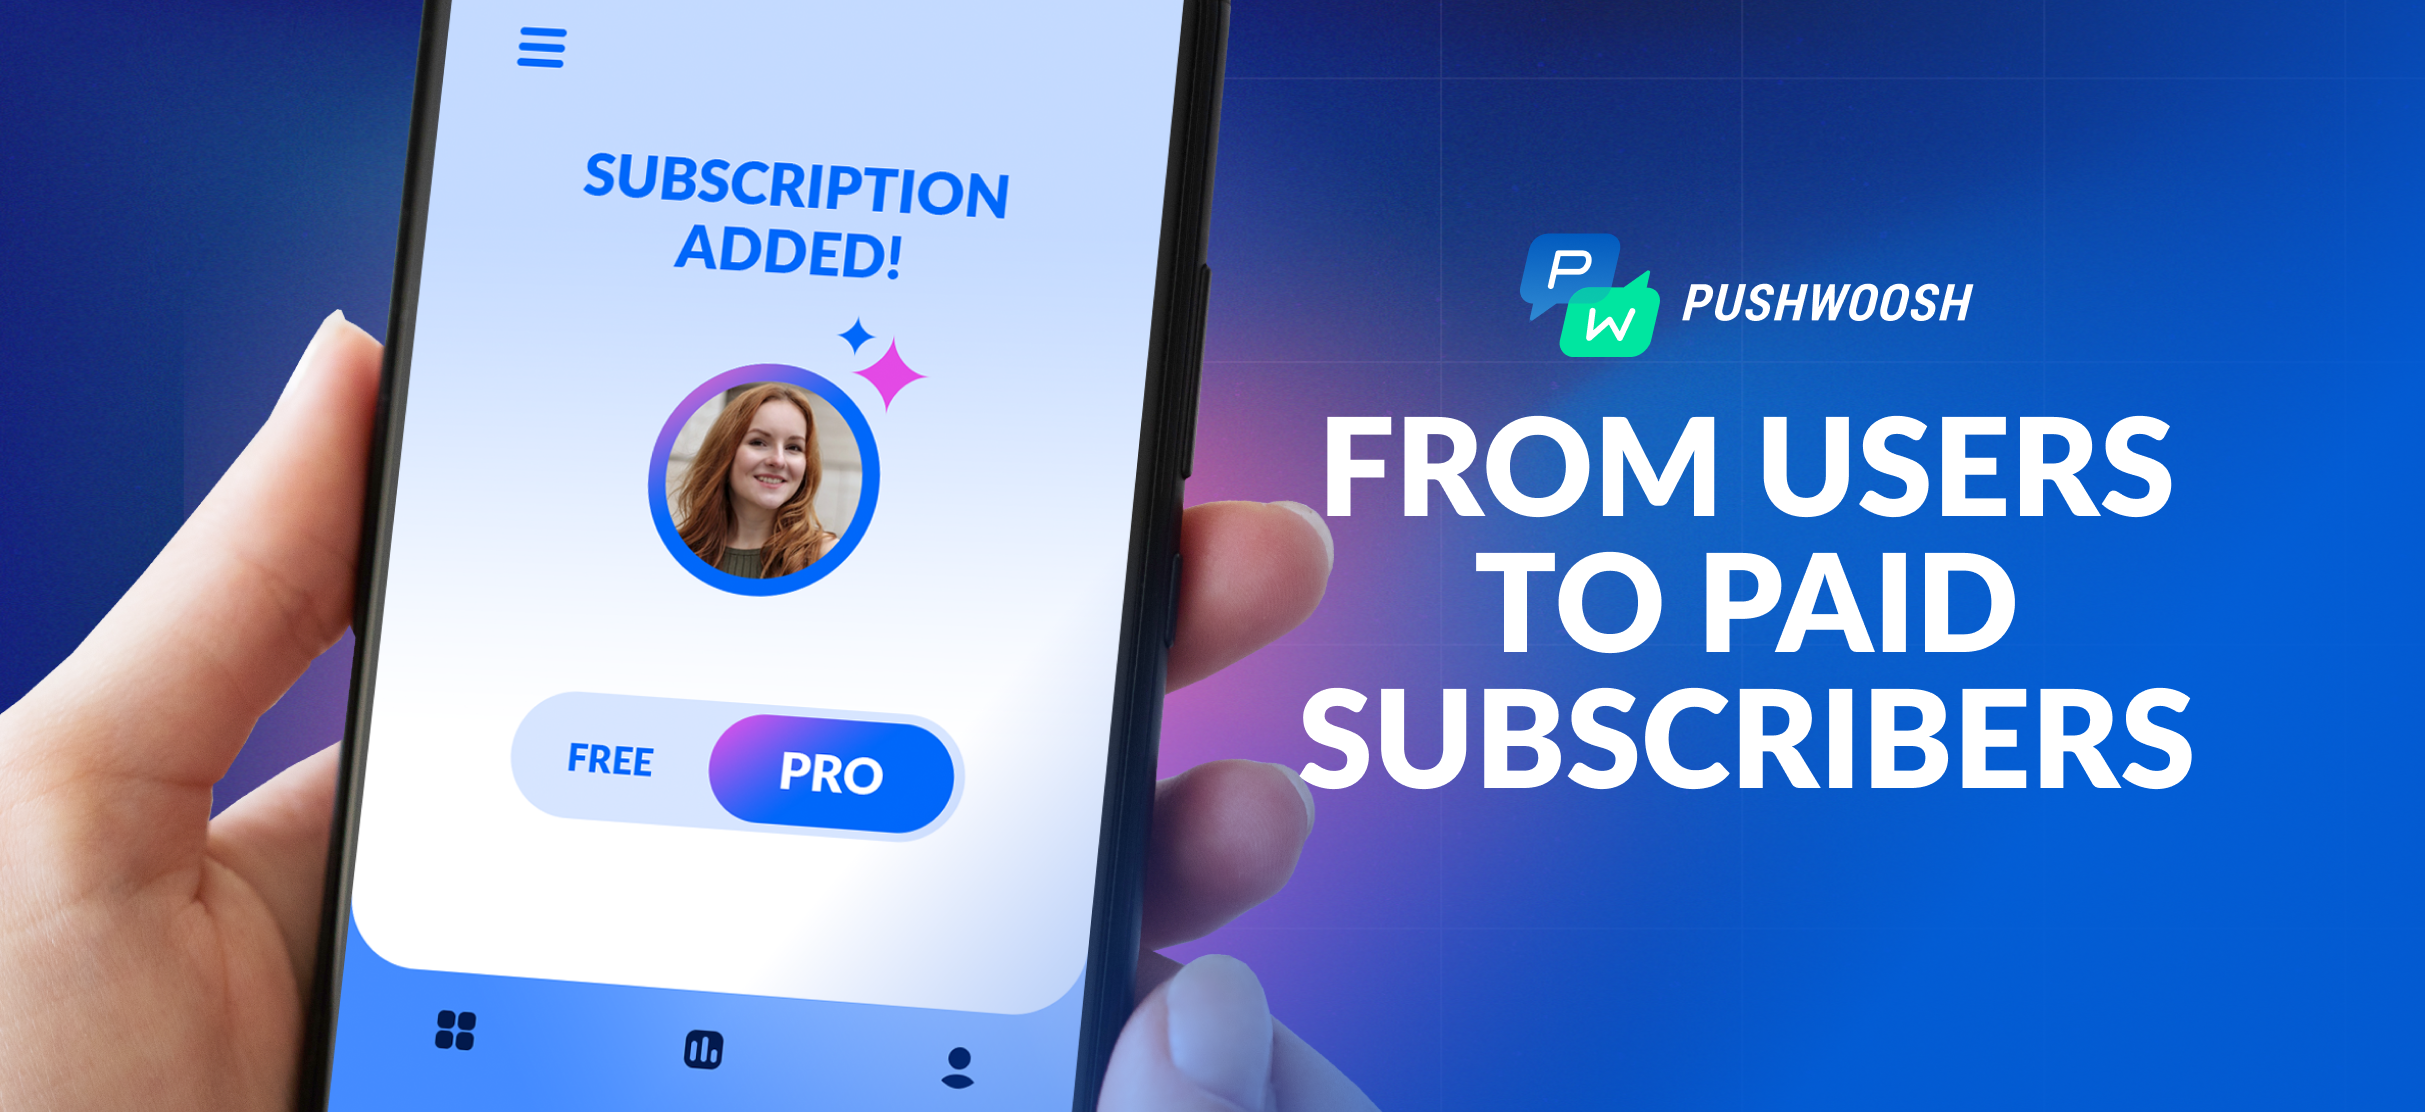 Engagement Is Key: How to Create a Winning Strategy for a Subscription App